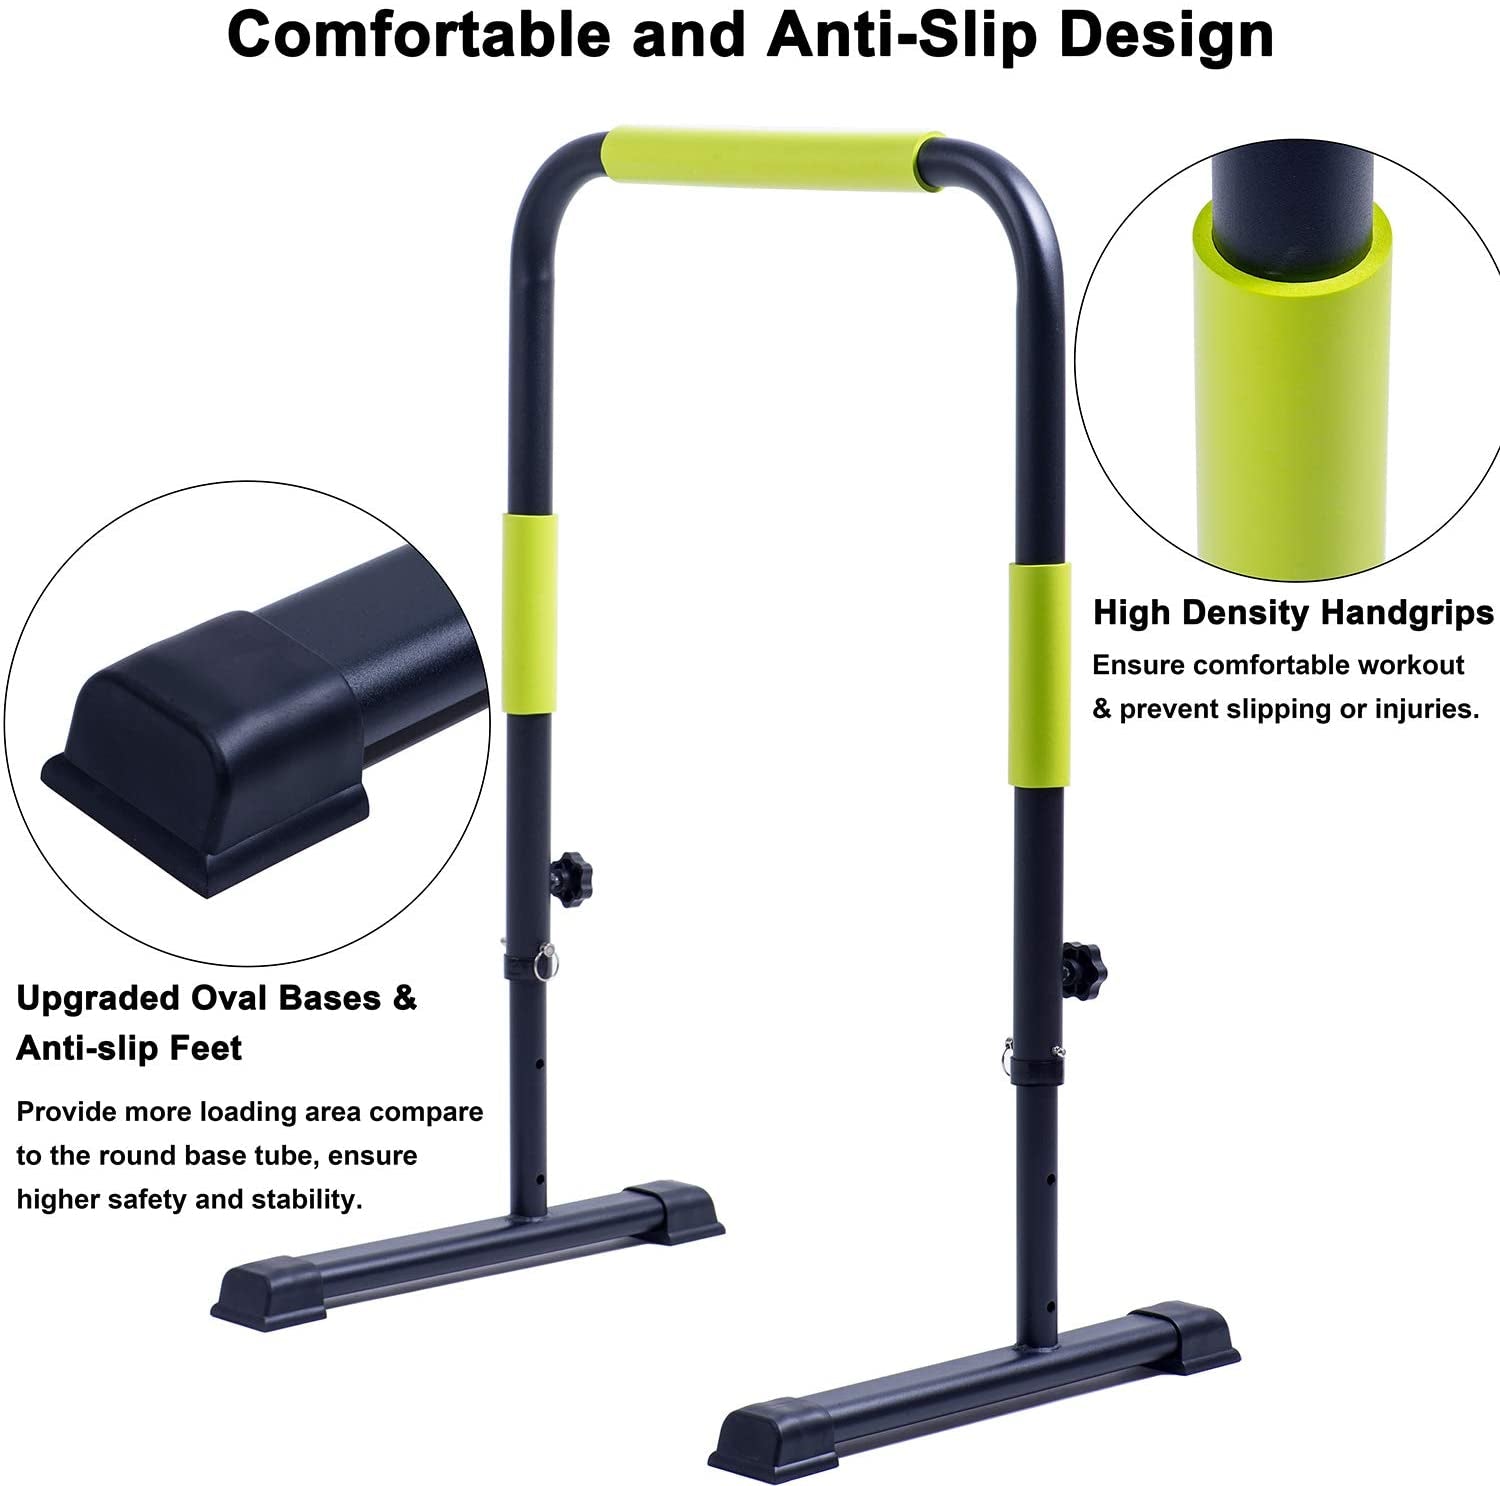 Height Adjustable Push up Stand Parallettes Dip Bar Station Heavy Duty Body Press Bar Strength Training Equipment for Home Gym